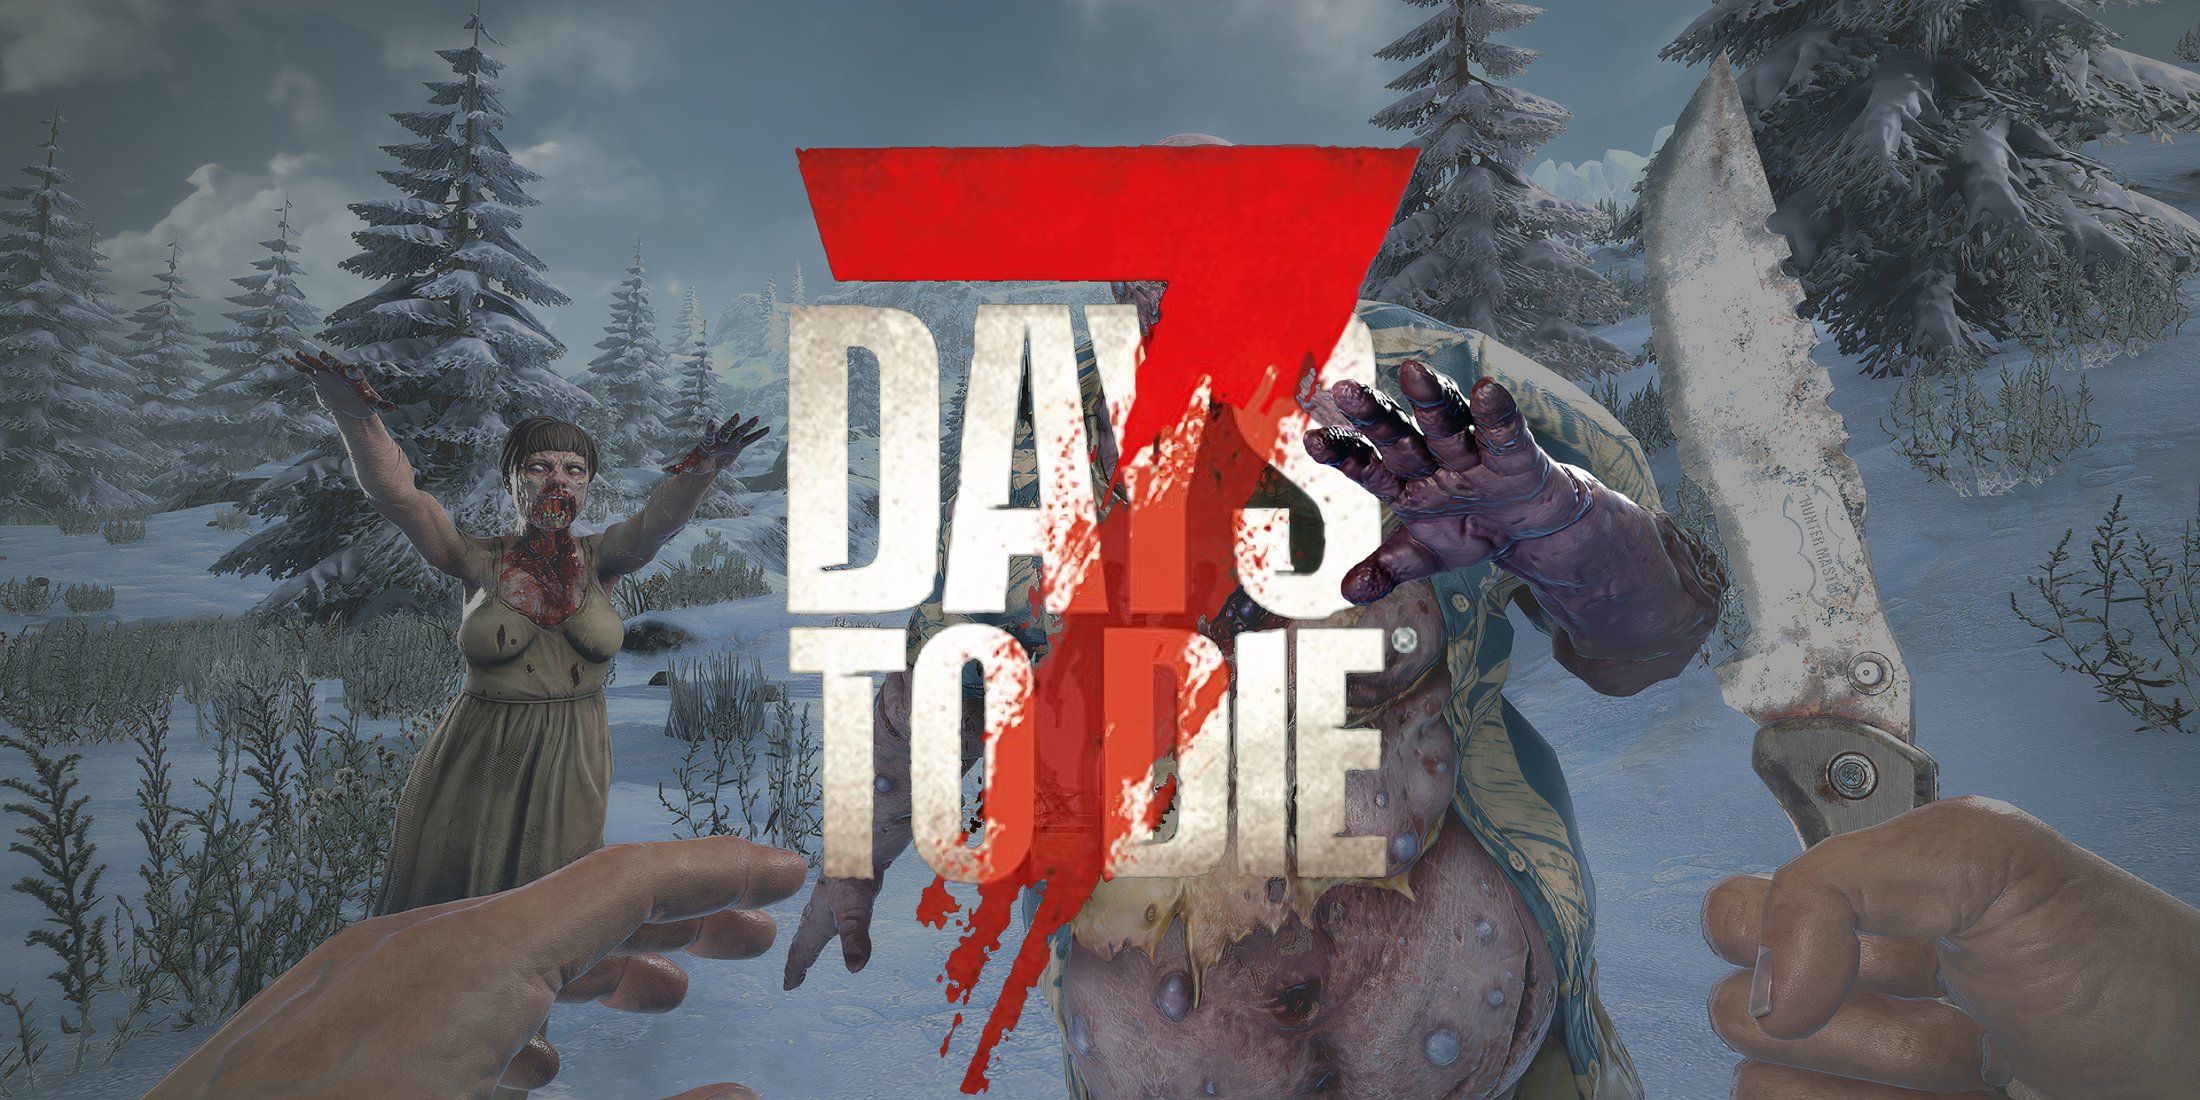 7 Days to Die zombies with game logo edit